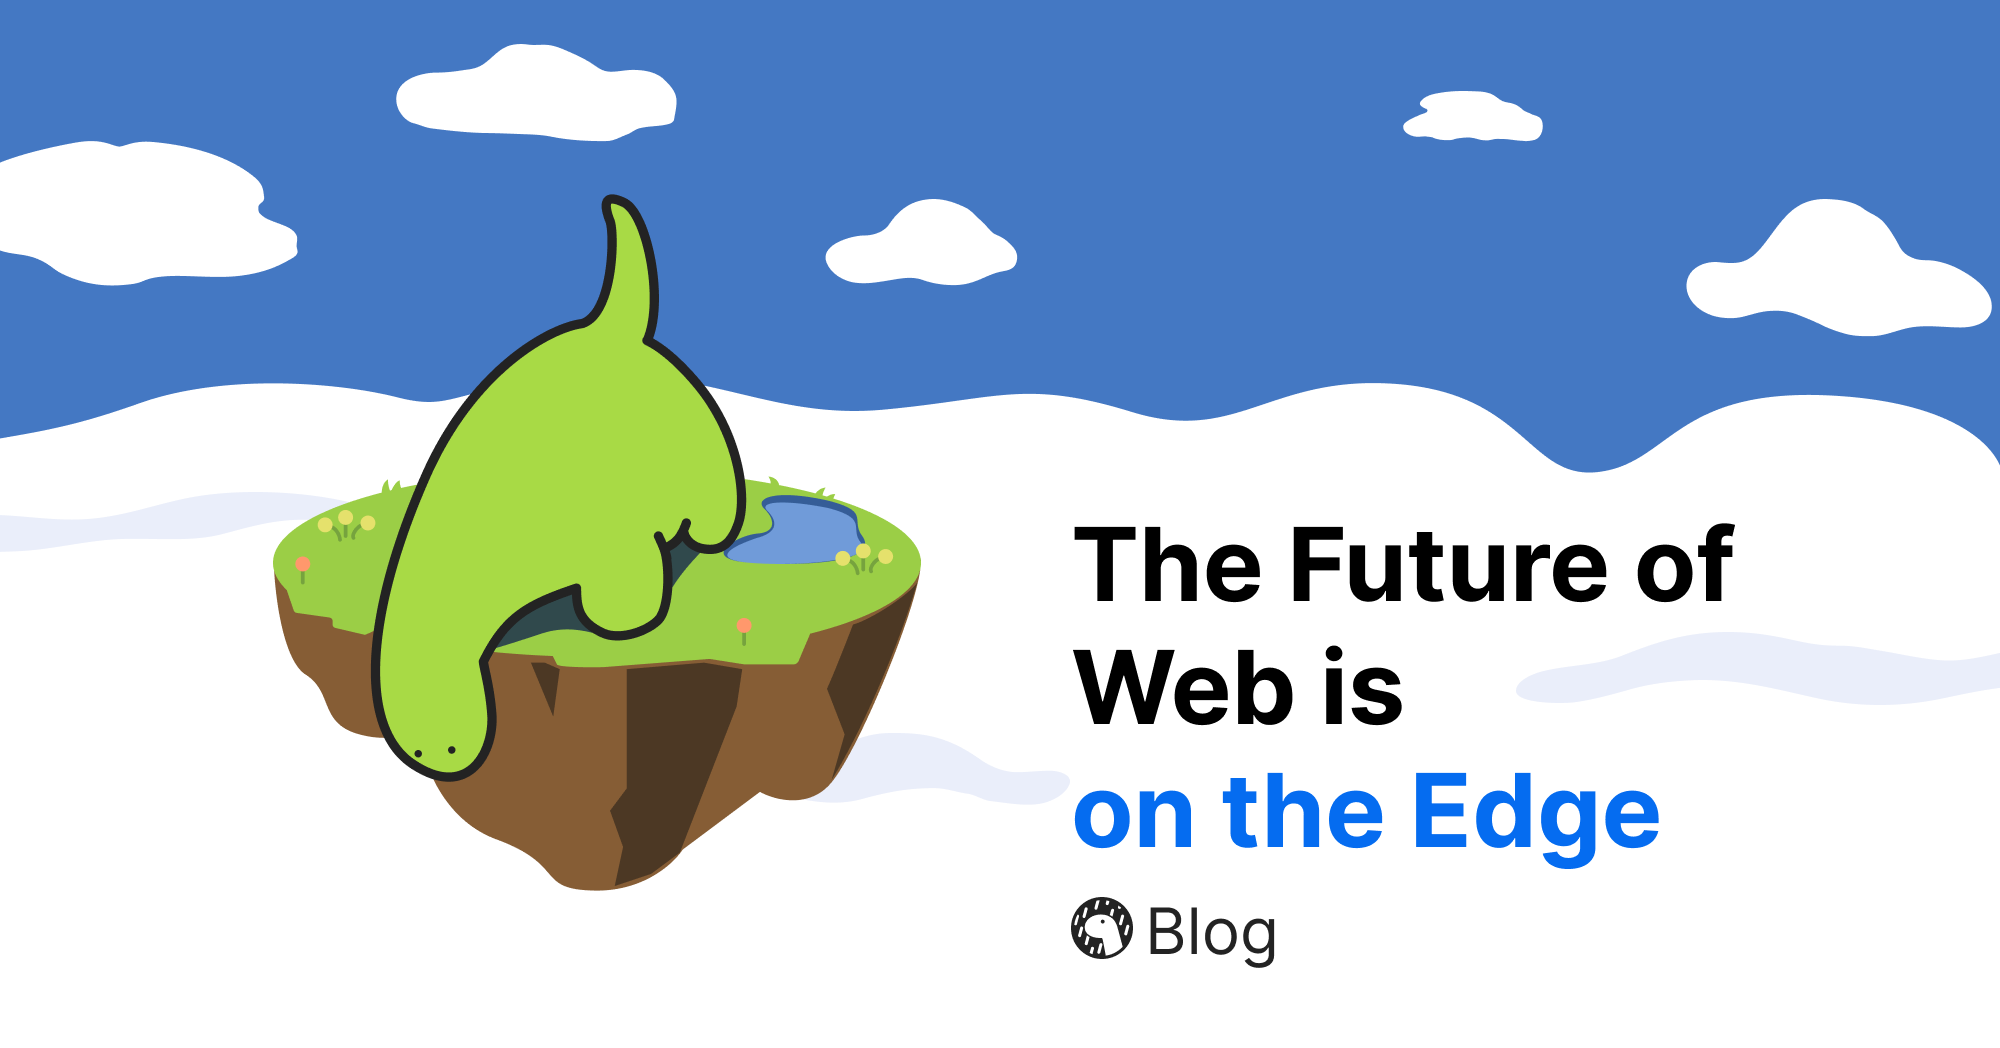 https://deno.com/blog/the-future-of-web-is-on-the-edge/ogp.png